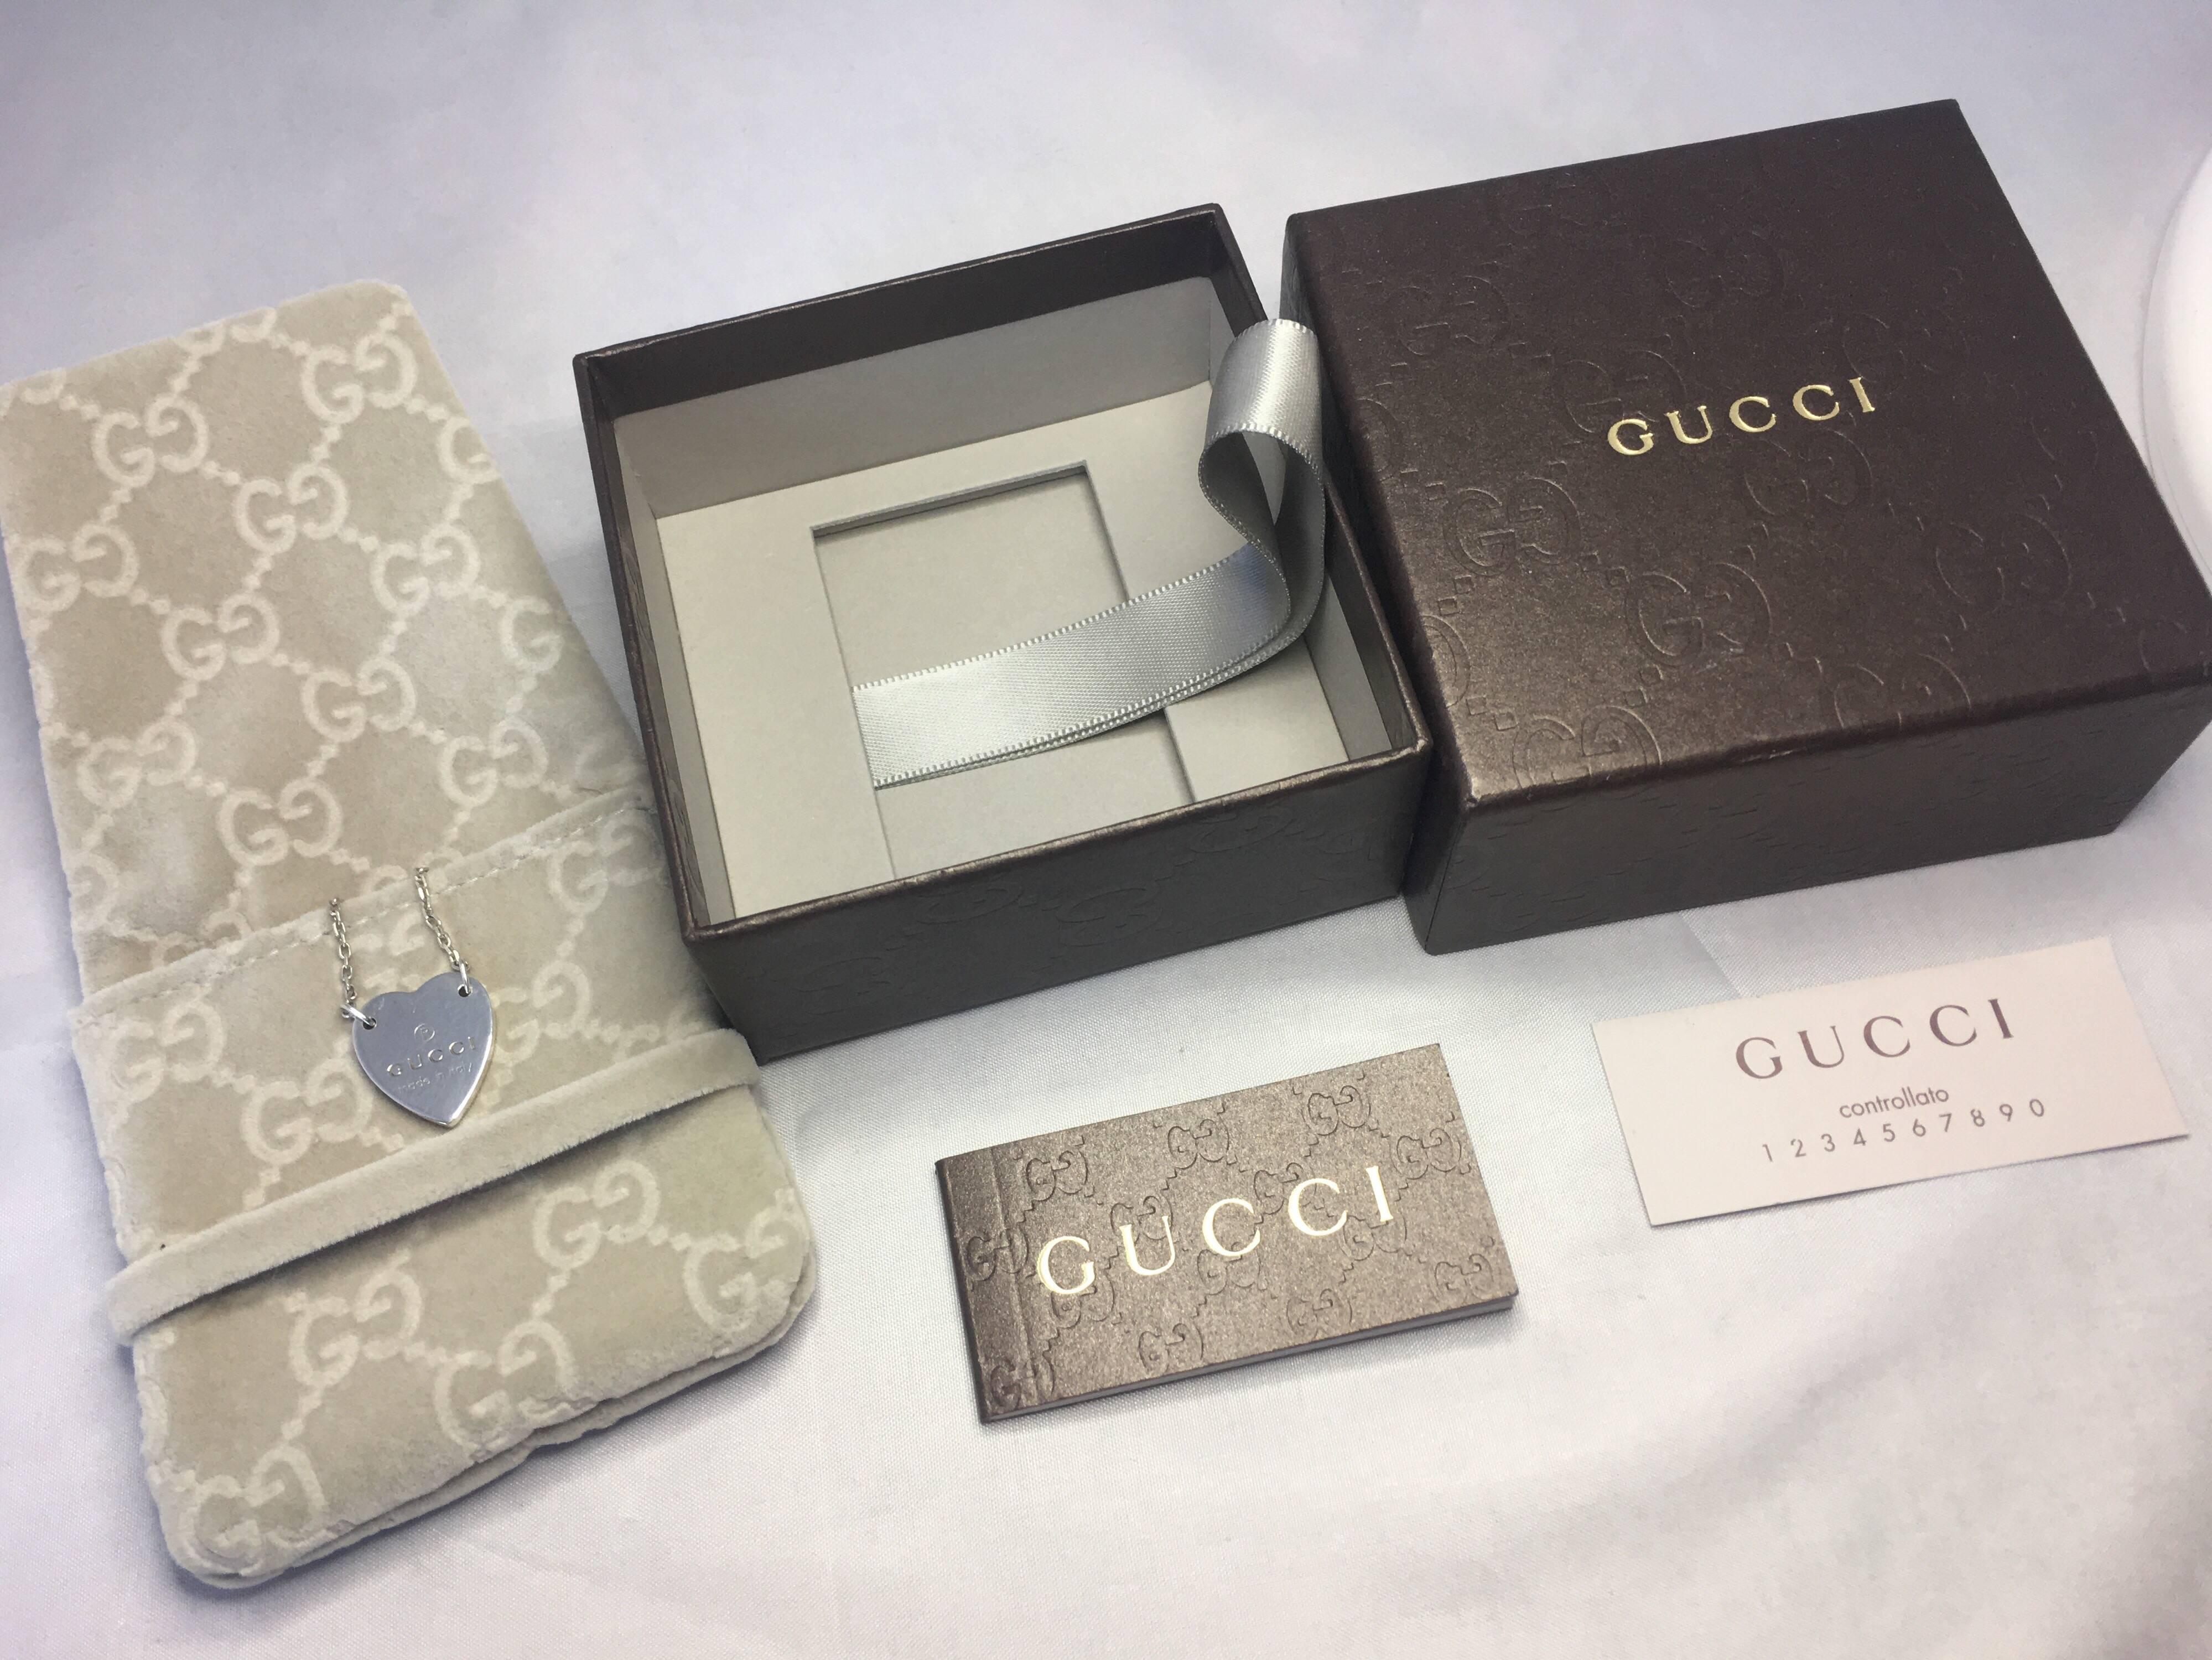 Gucci 'Made In Italy' silver heart pendant necklace. Comes with original Gucci box, pouch and paperwork.

Used item, some minor scratches on it. Has been professionally cleaned and polished so very bright and shiny.

Chain can be worn at two lengths